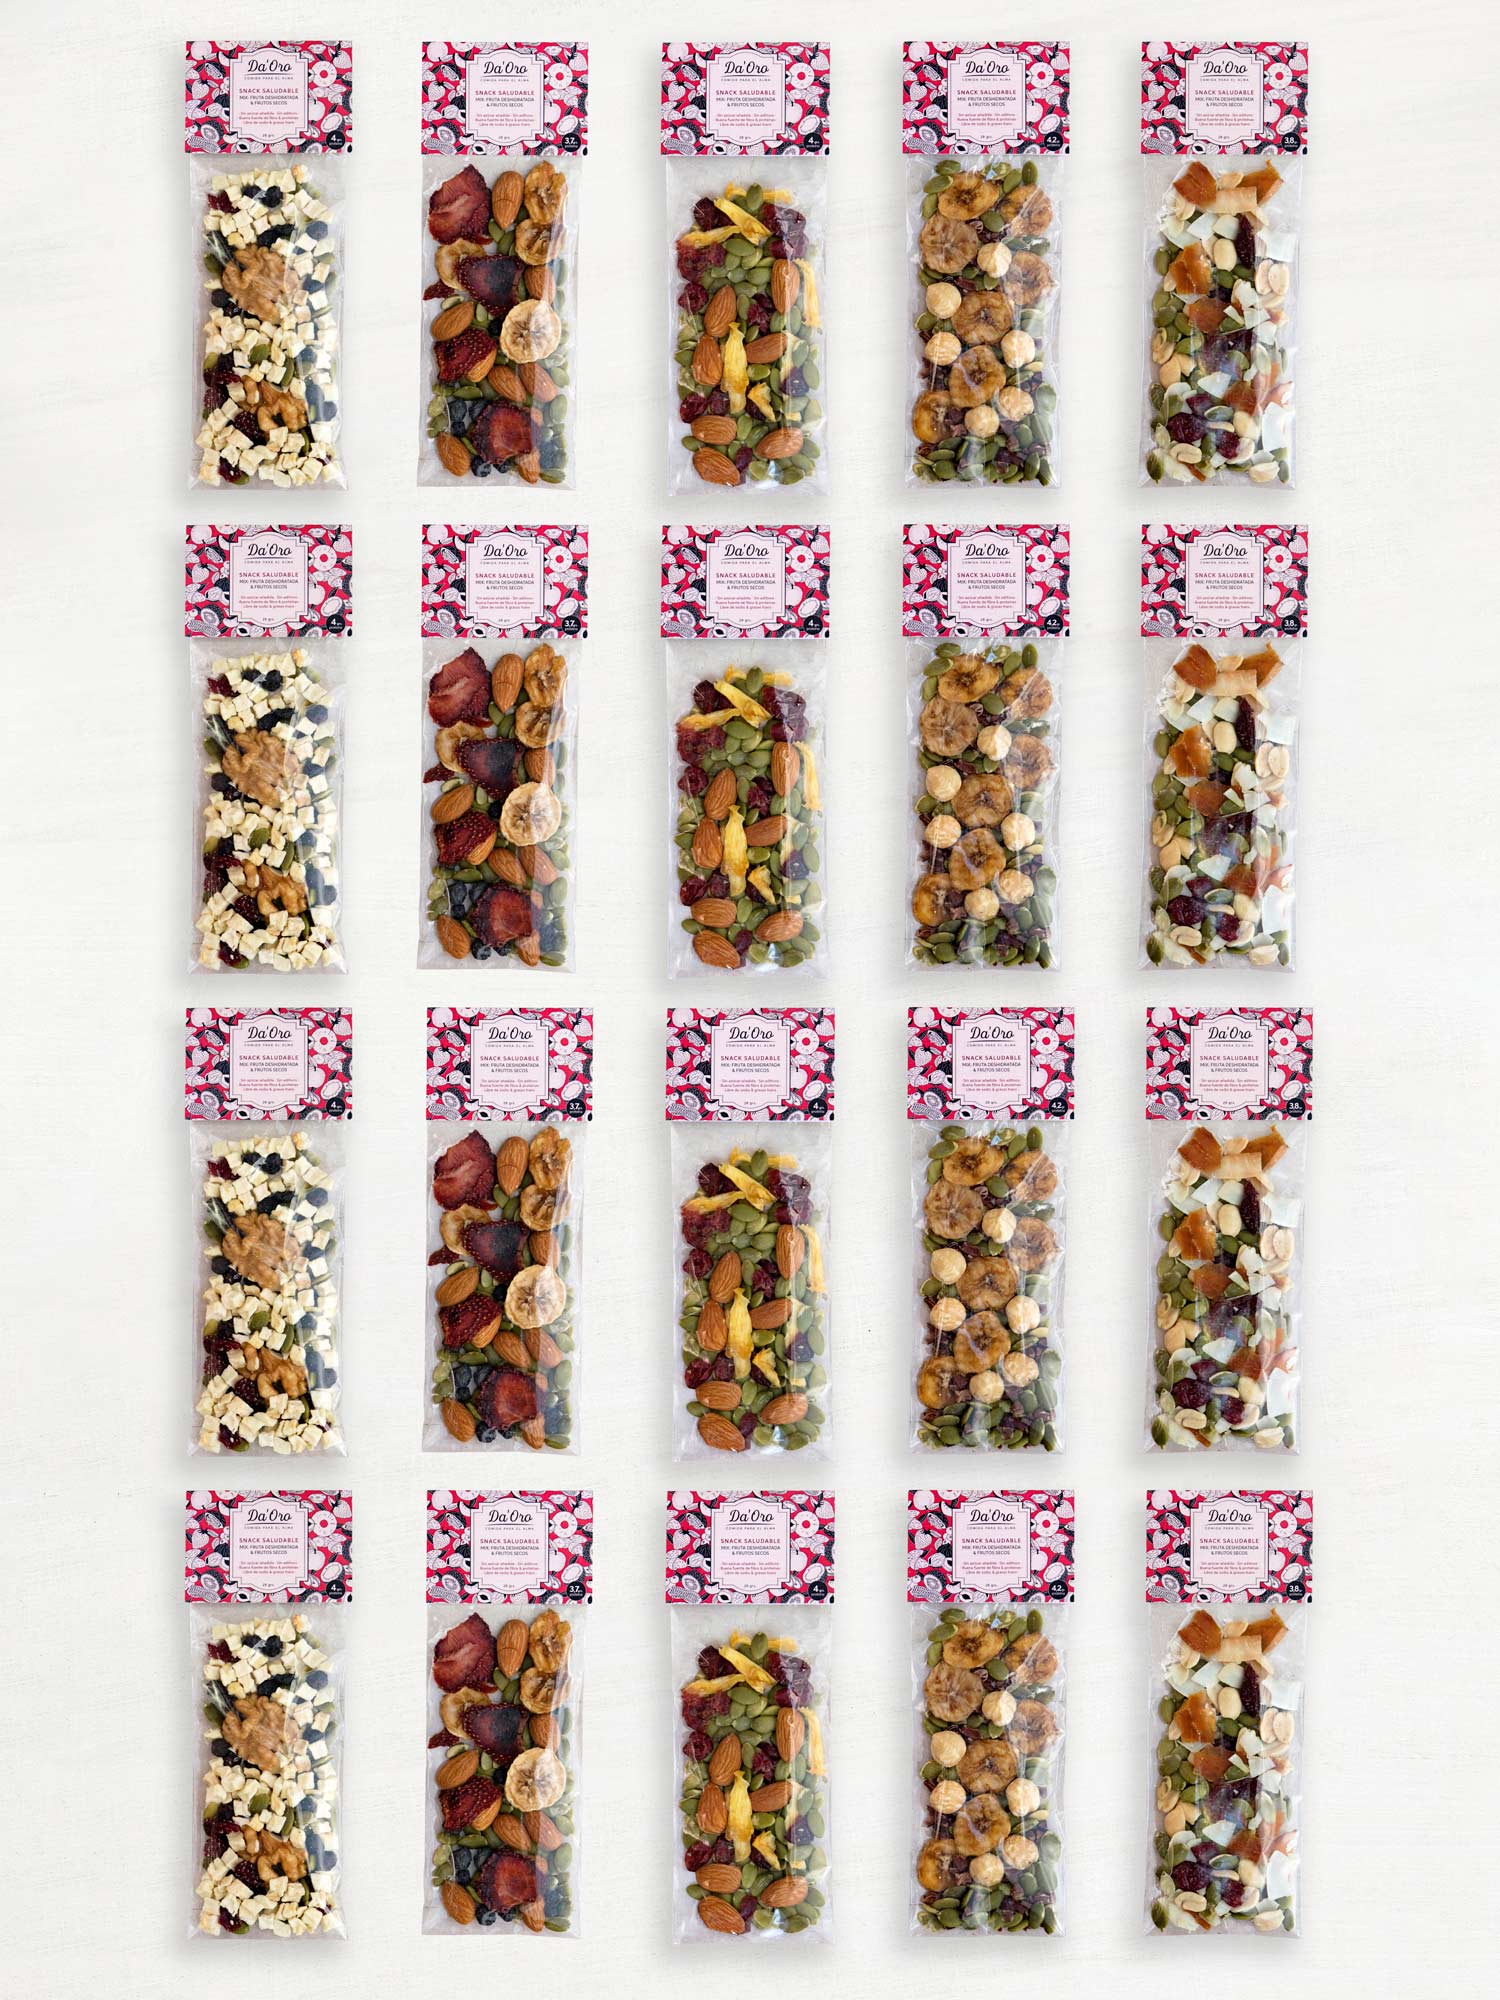 Pack Snack Mix Mensual 20 unidades